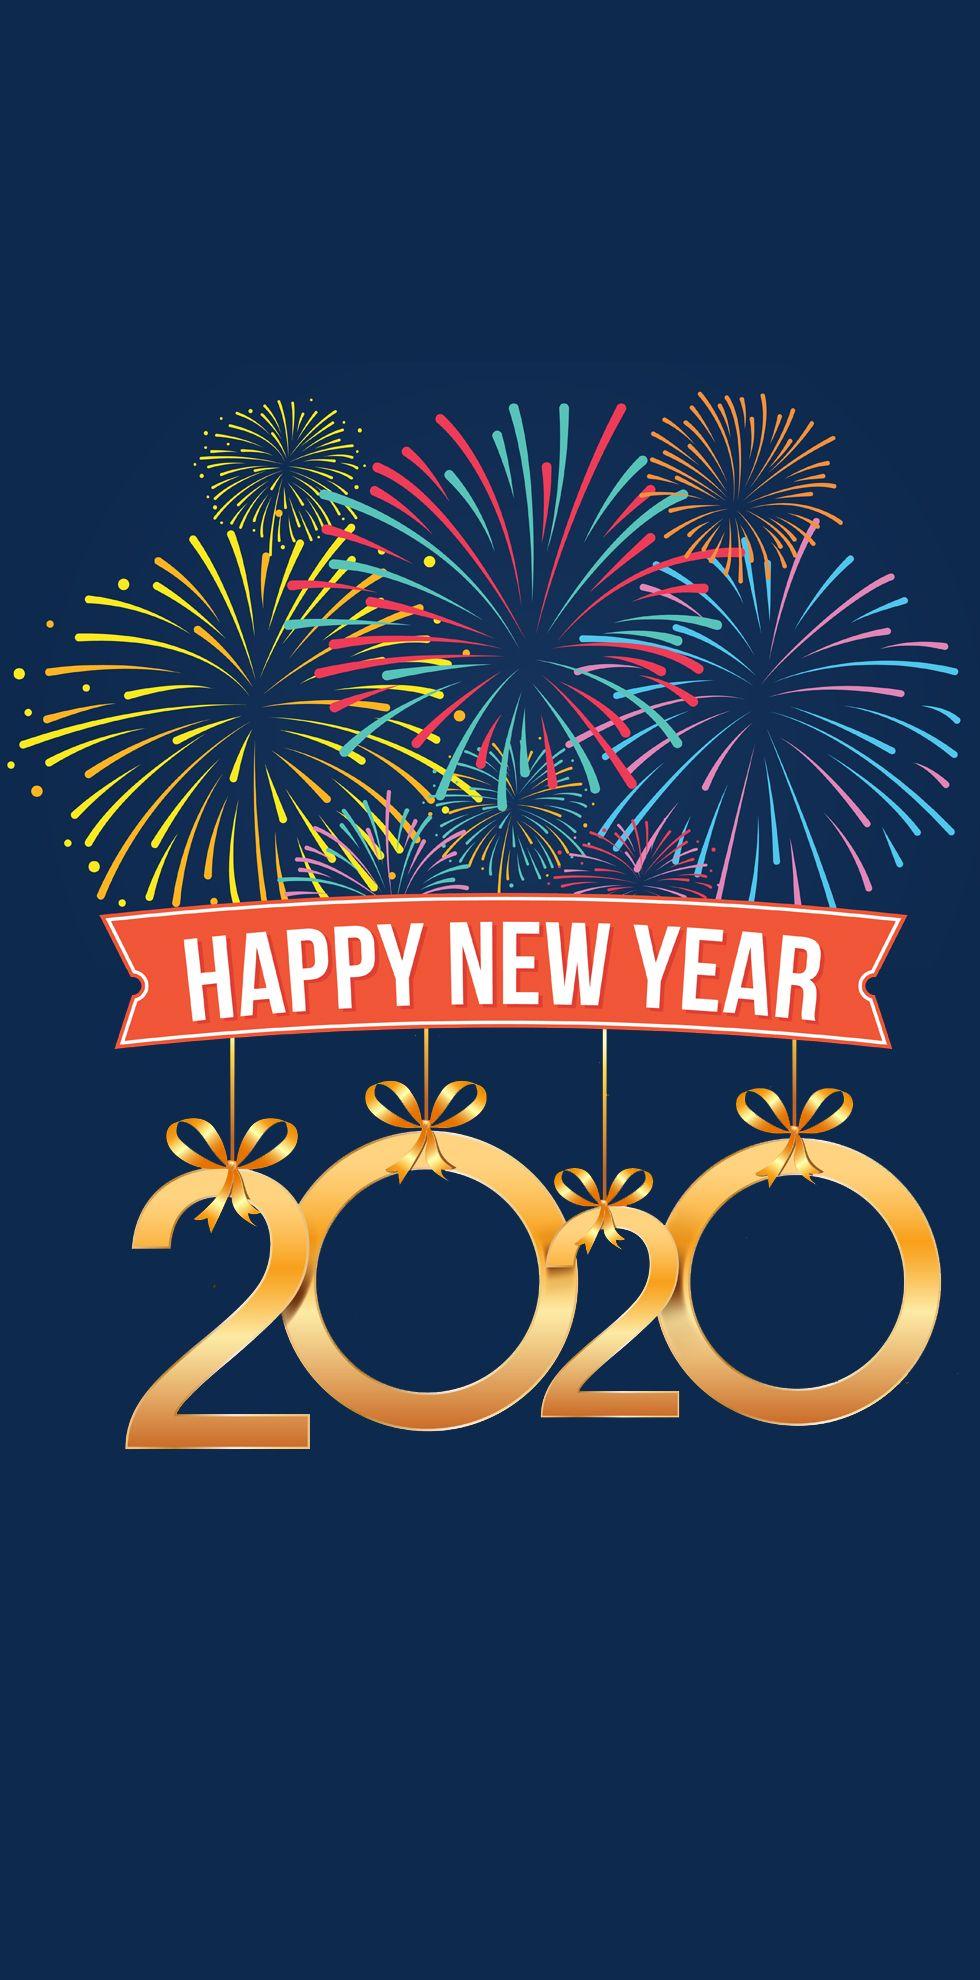 Free download Download 2020 happy new year mobile wallpaper